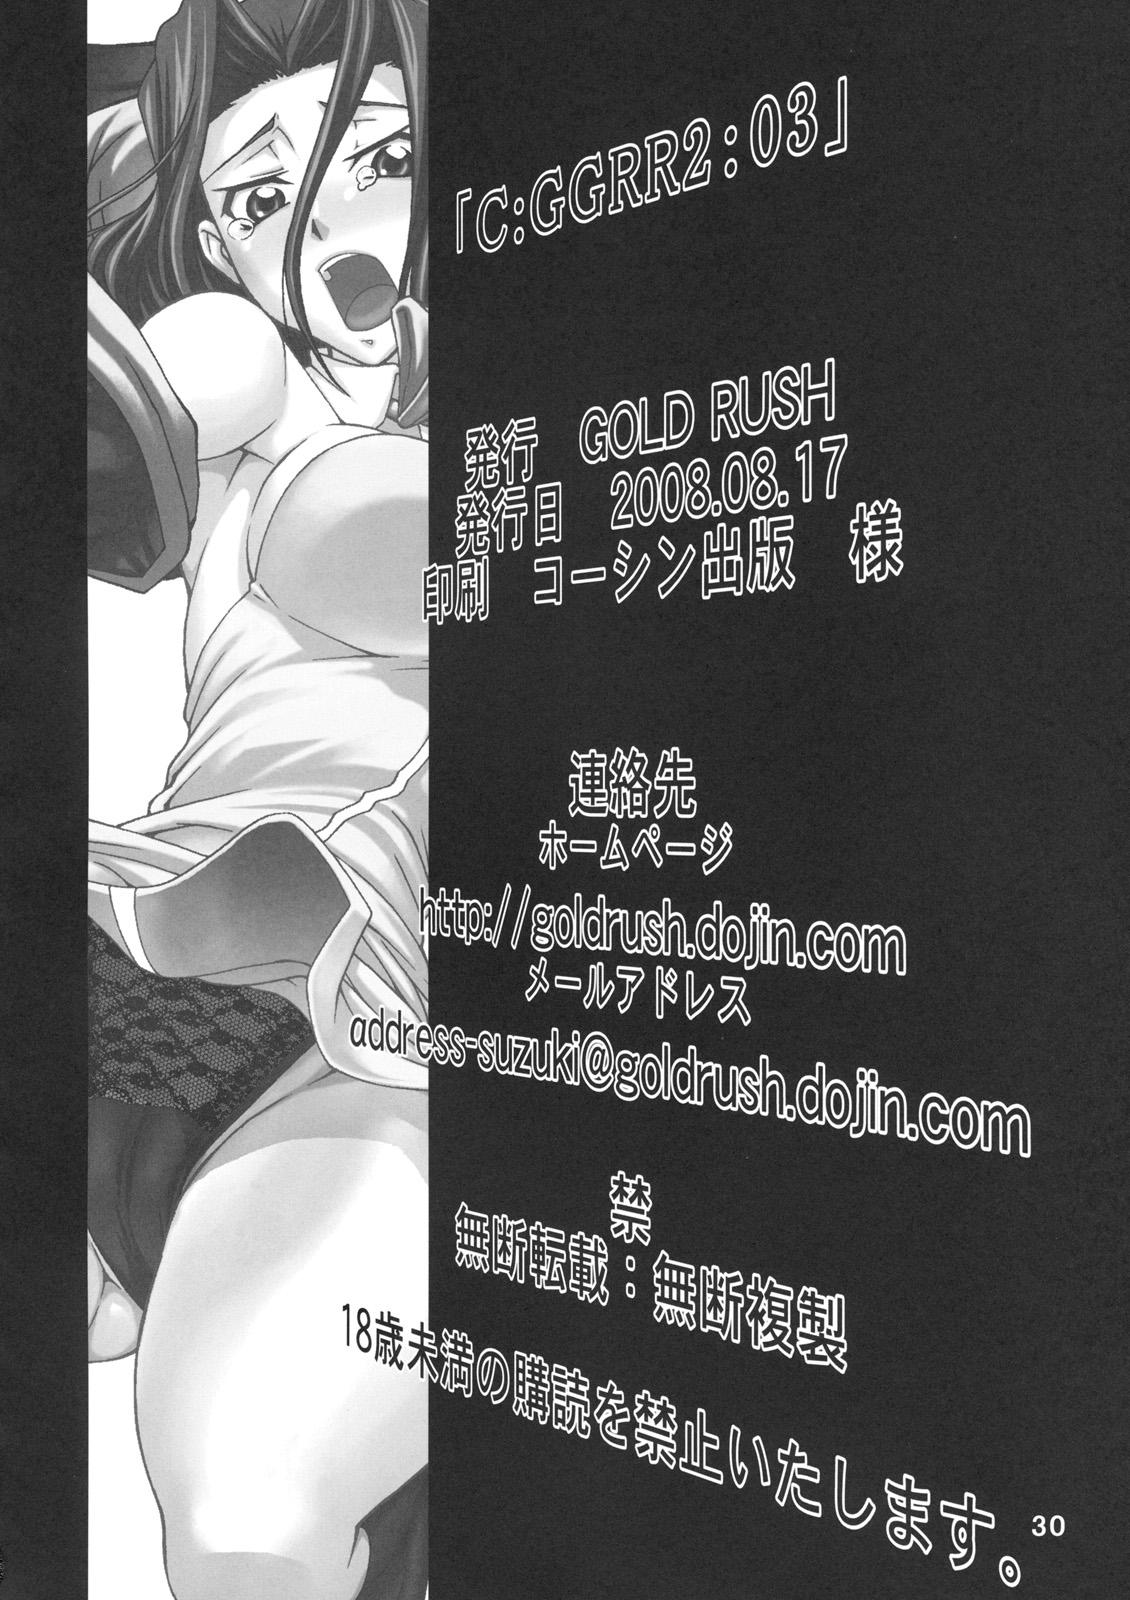 Squirting C:GGRR2:03 - Code geass Russian - Page 29